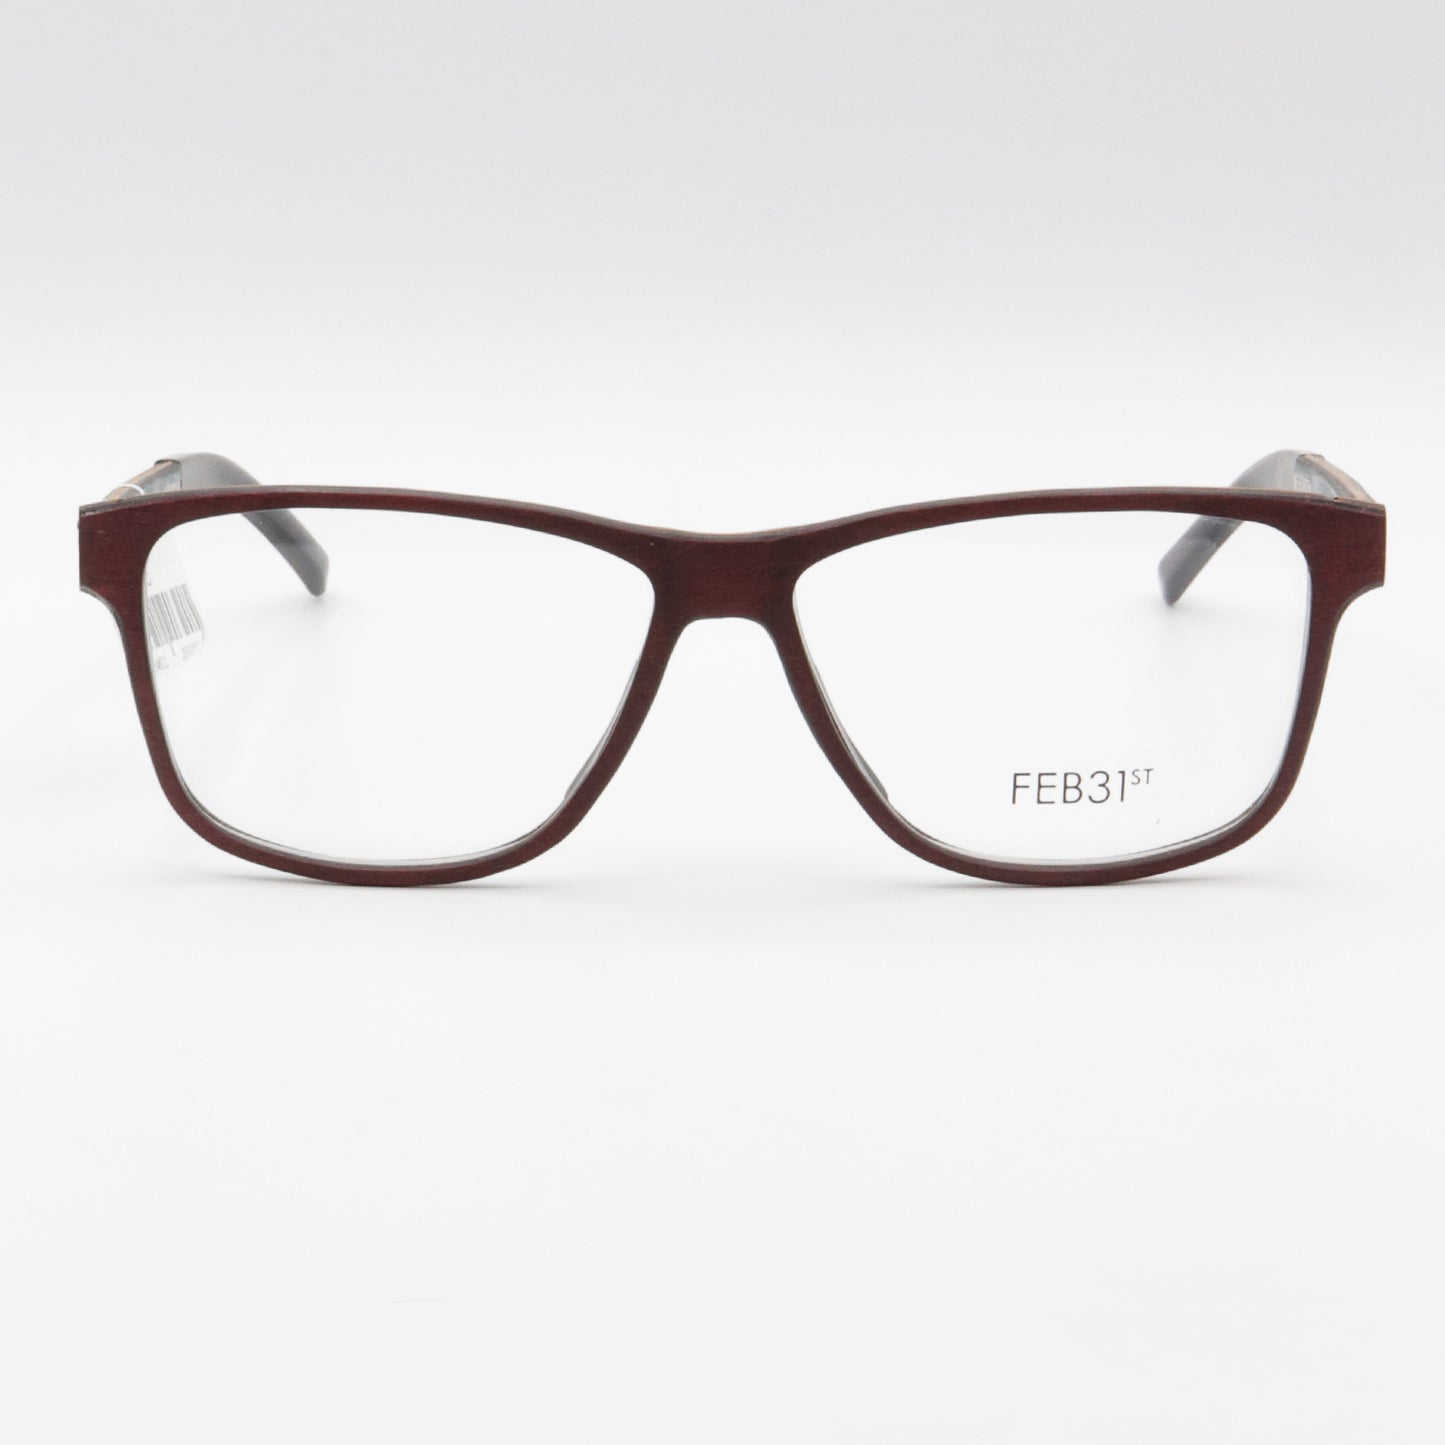 Alex by FEB31st wooden glasses Burgundy and Green